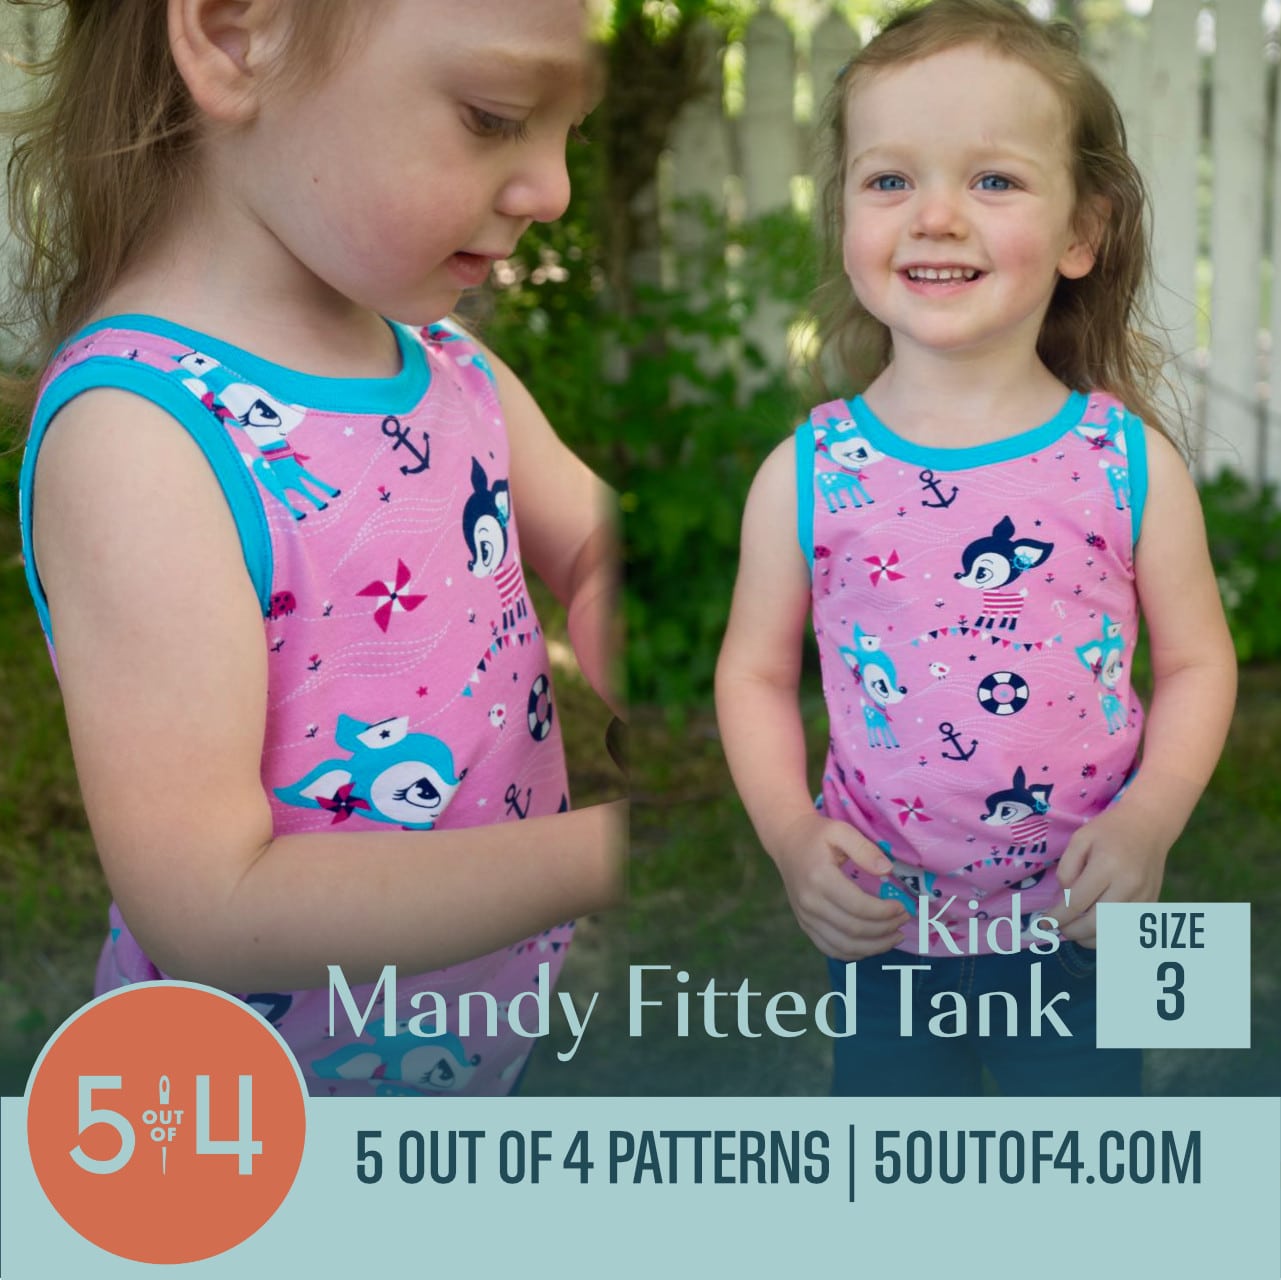 Kids' Mandy Fitted Tank